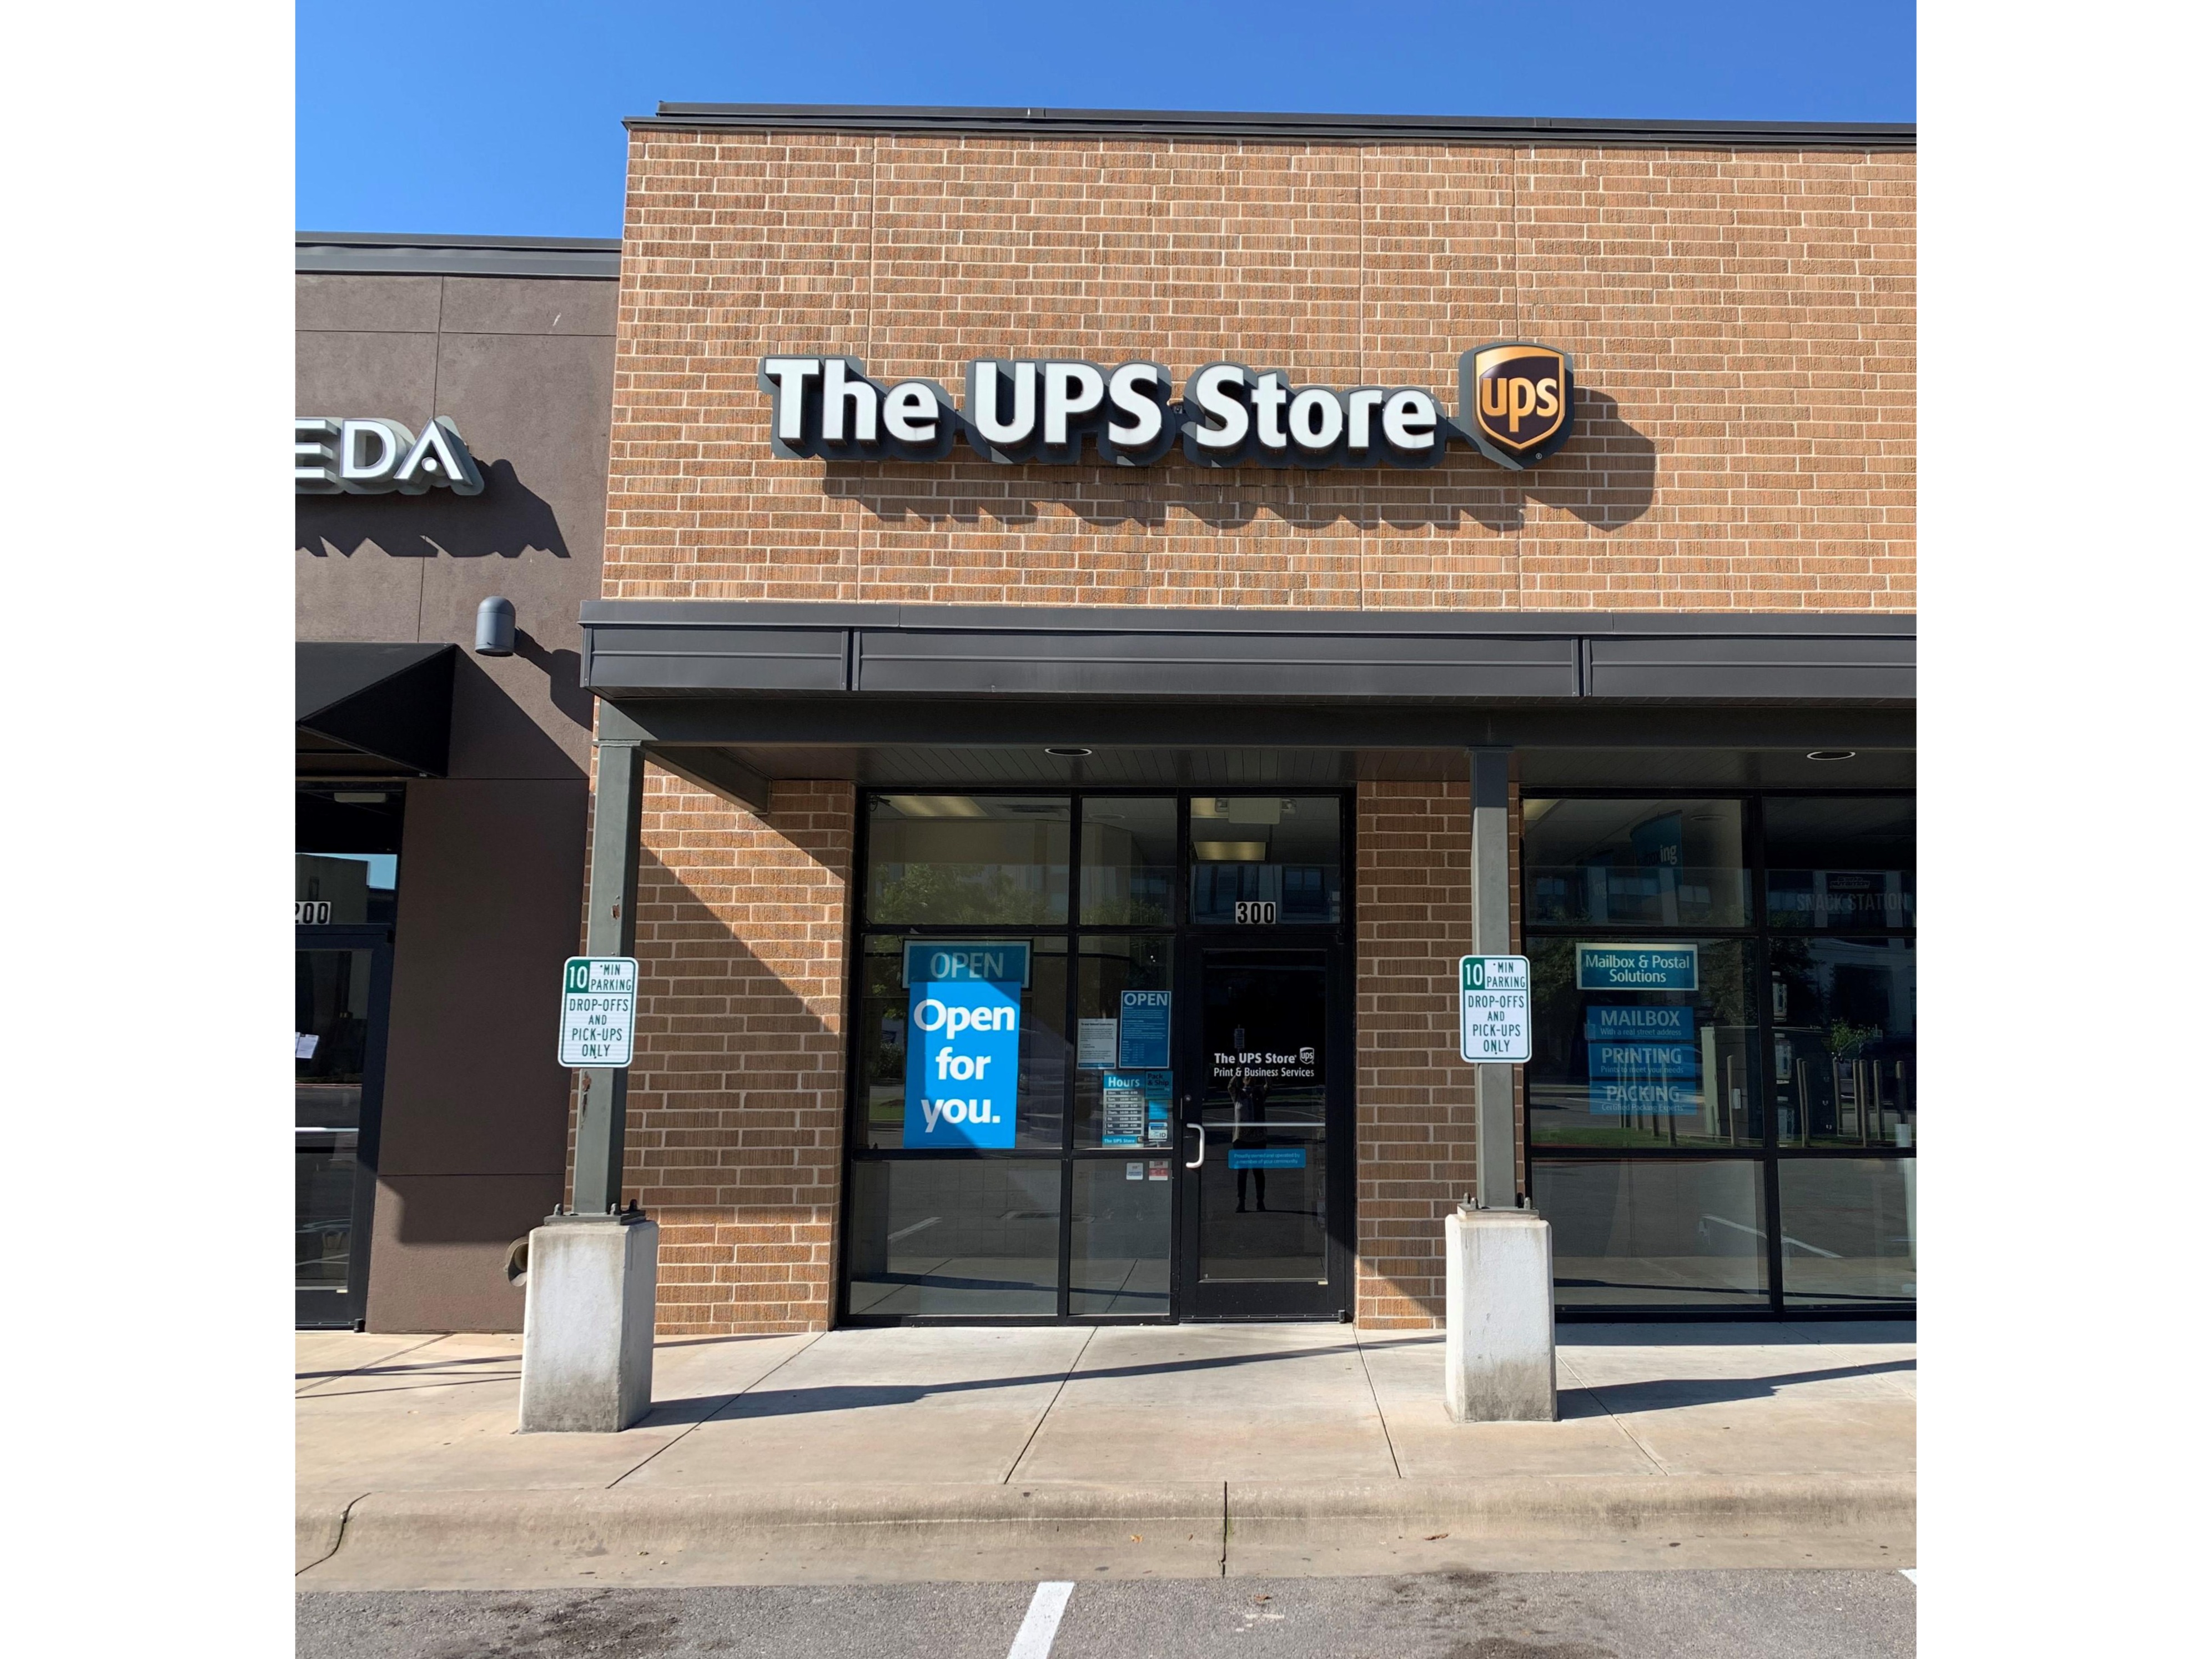 Facade of The UPS Store The Domain